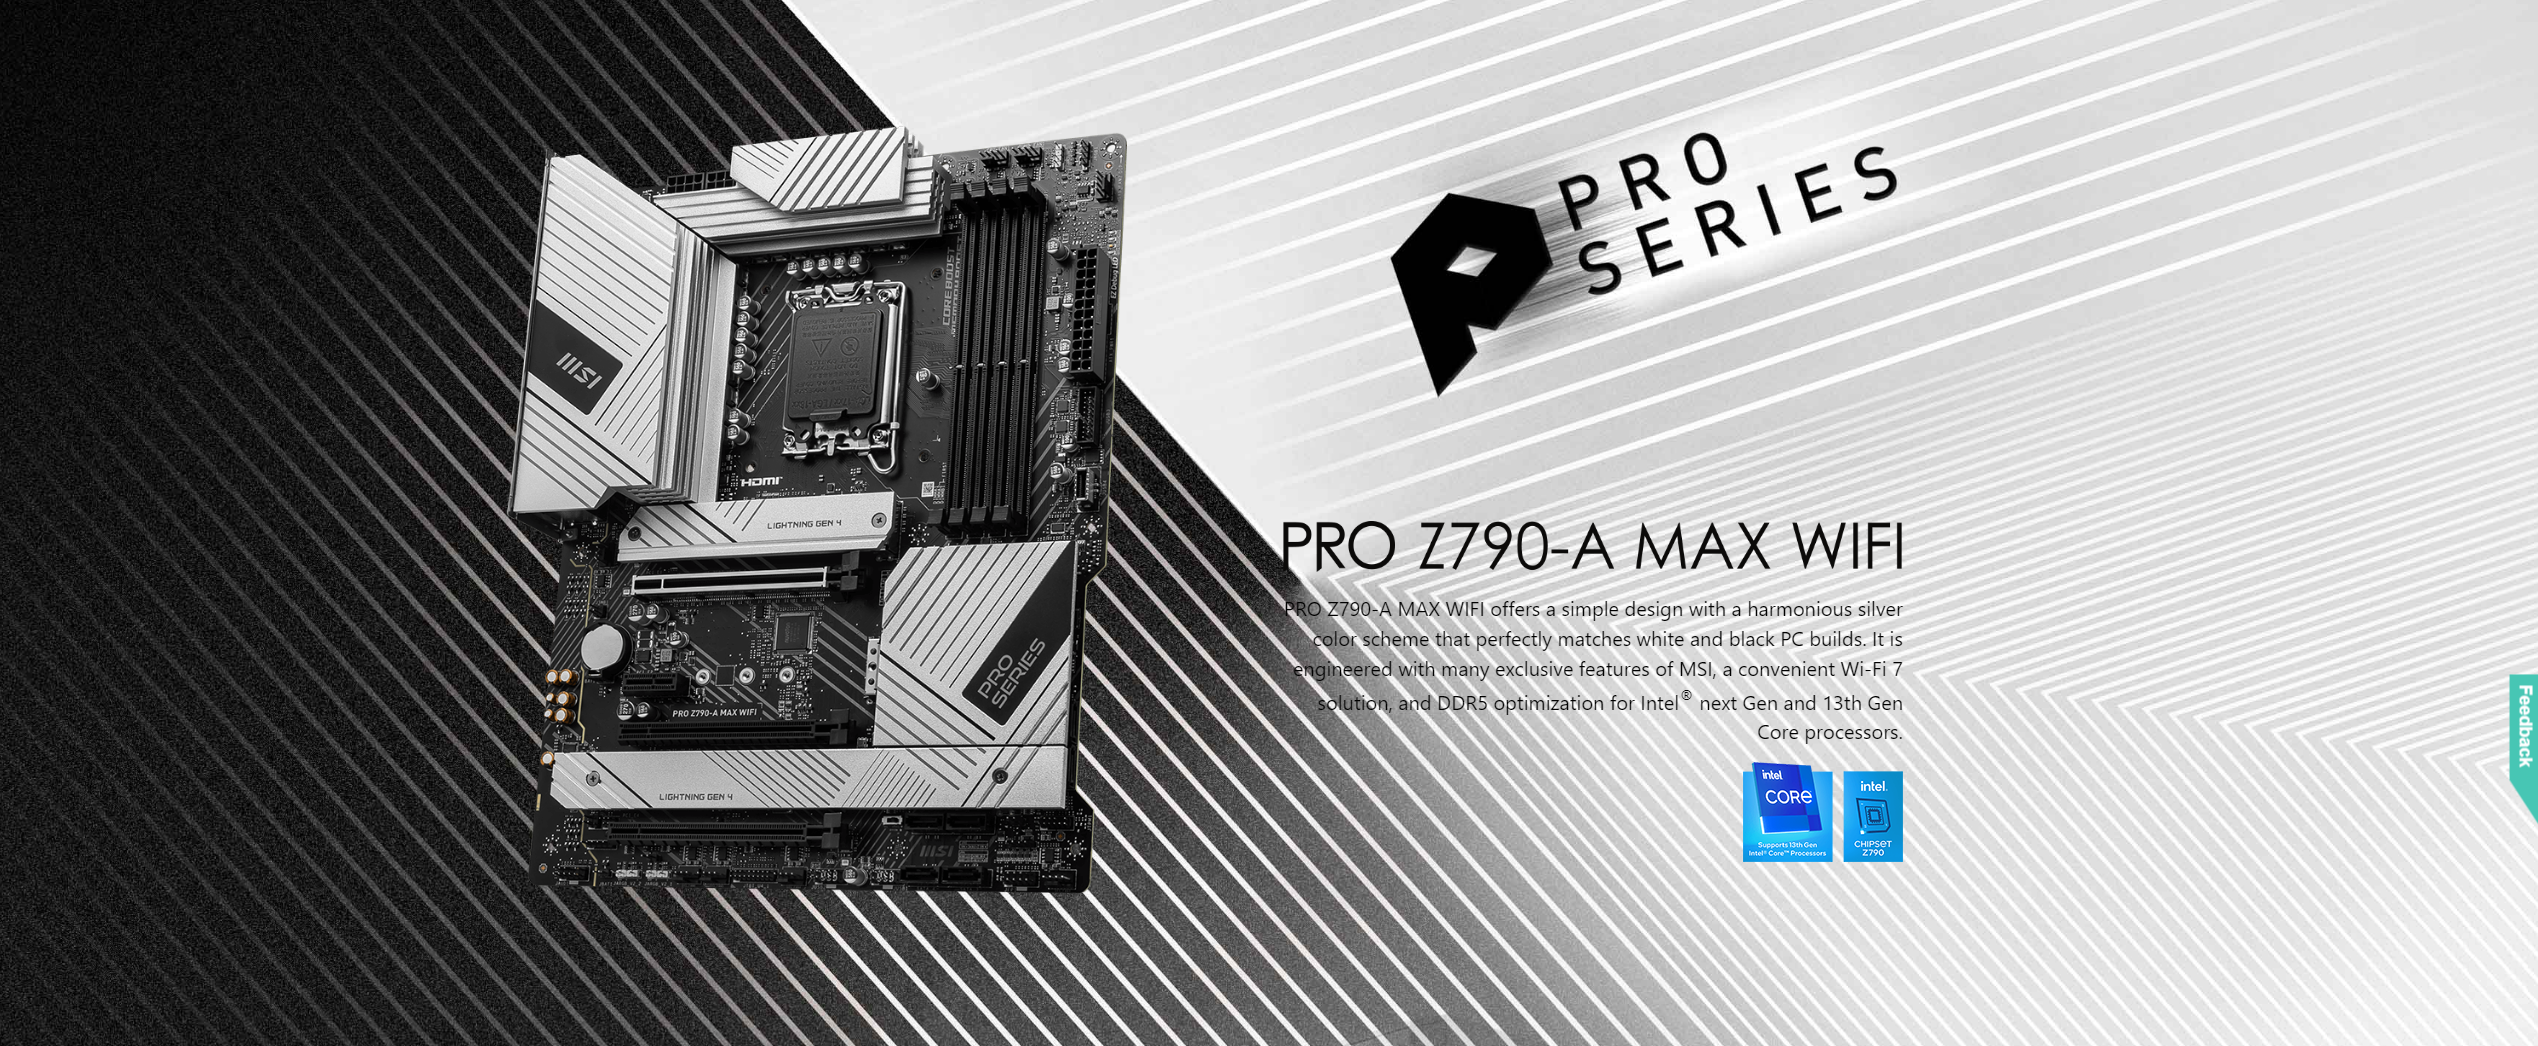 A large marketing image providing additional information about the product MSI PRO Z790-A Max Wifi LGA1700 ATX Desktop Motherboard - Additional alt info not provided